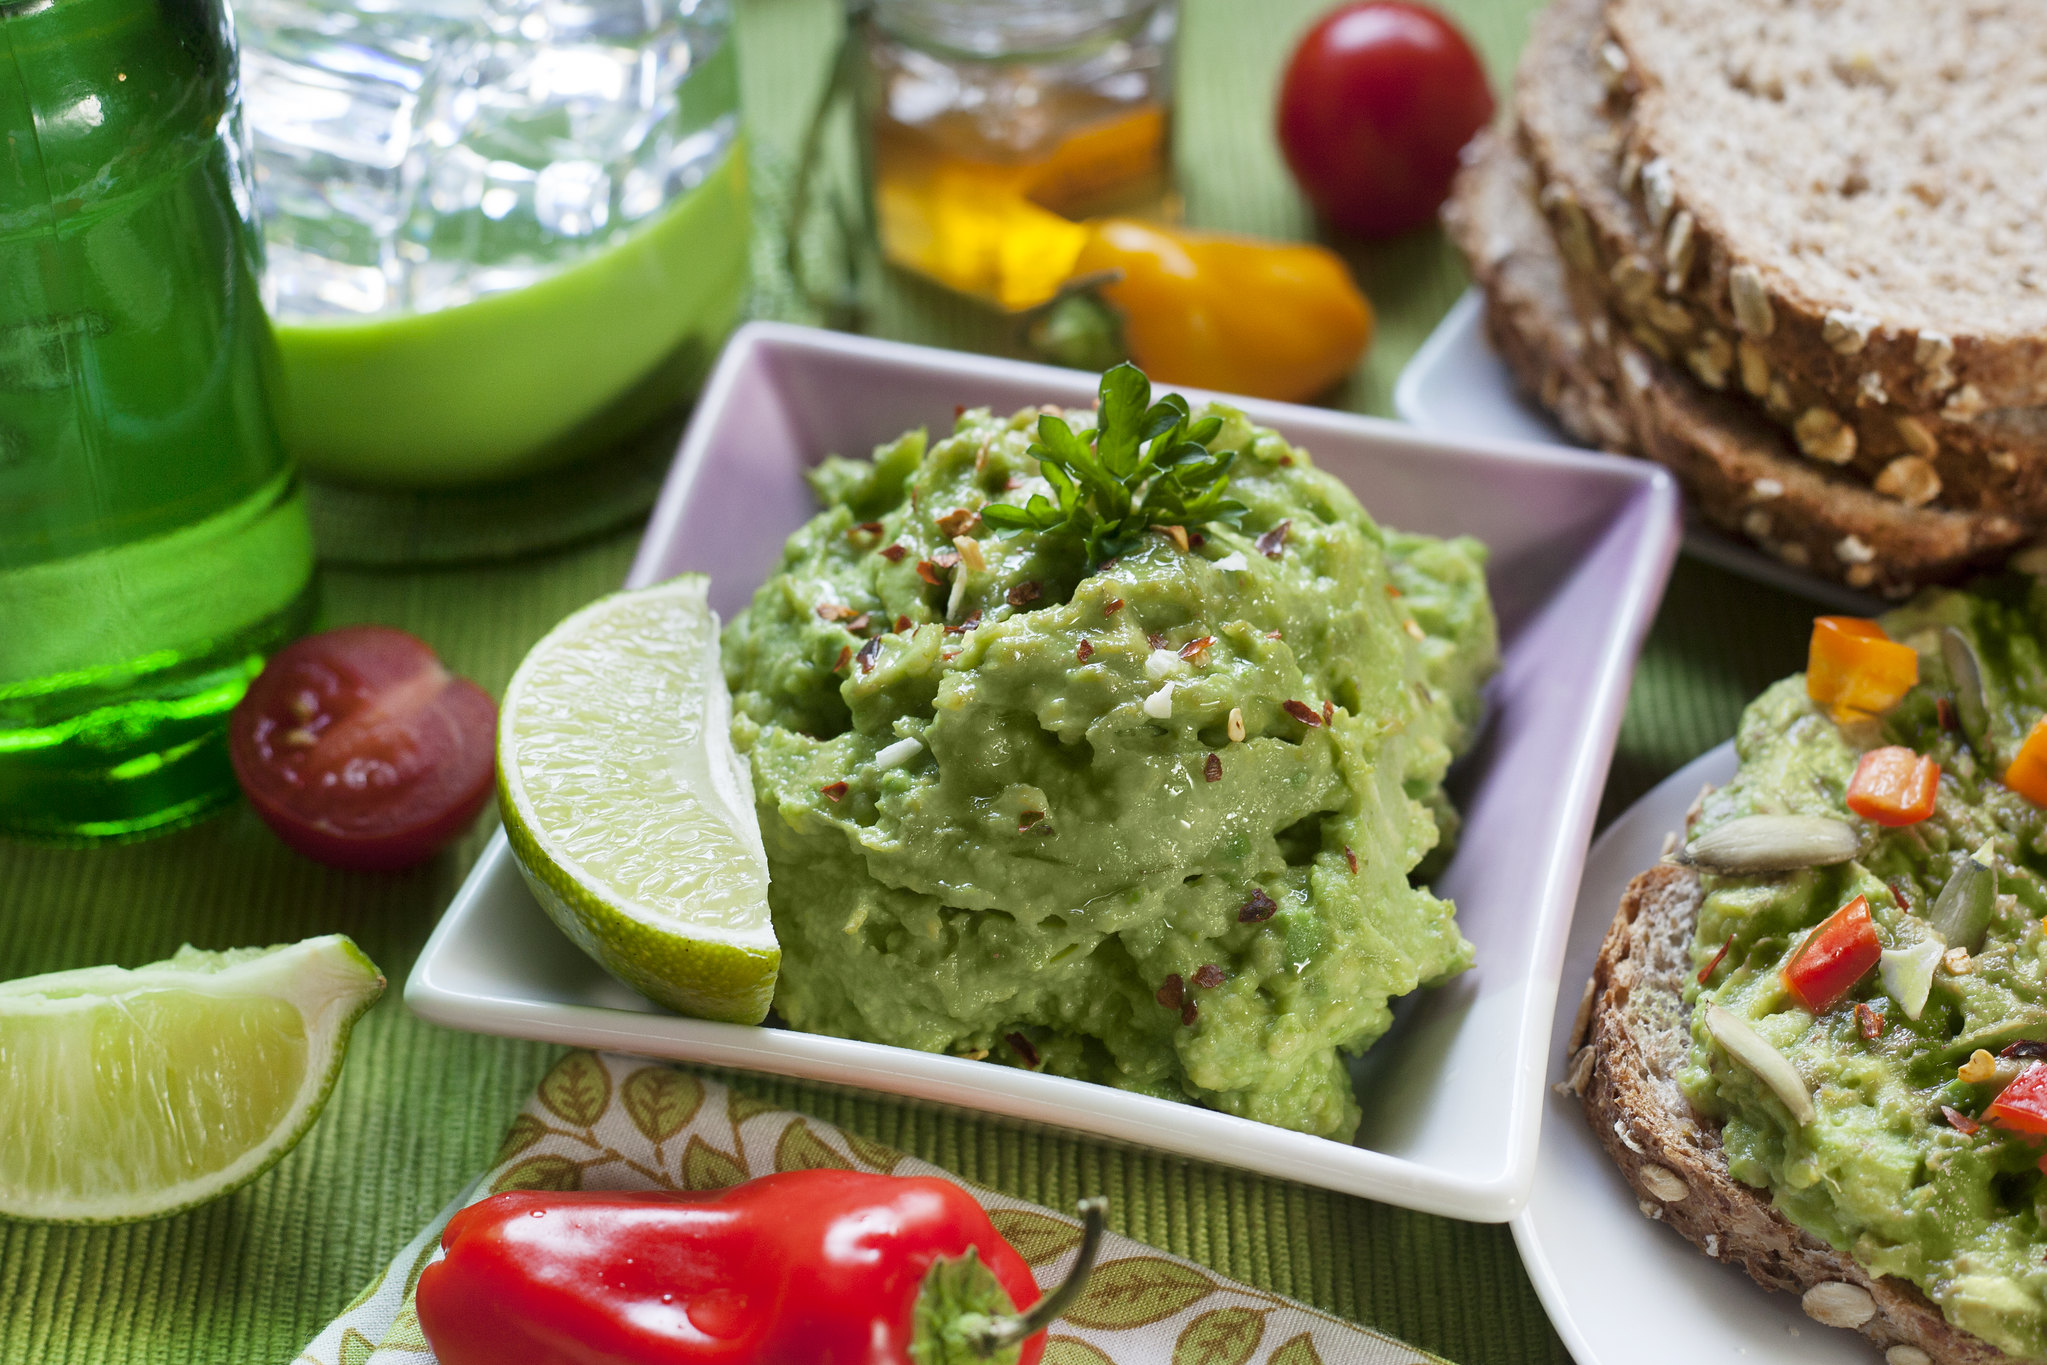 Bowl of guacamole amongst other foods.